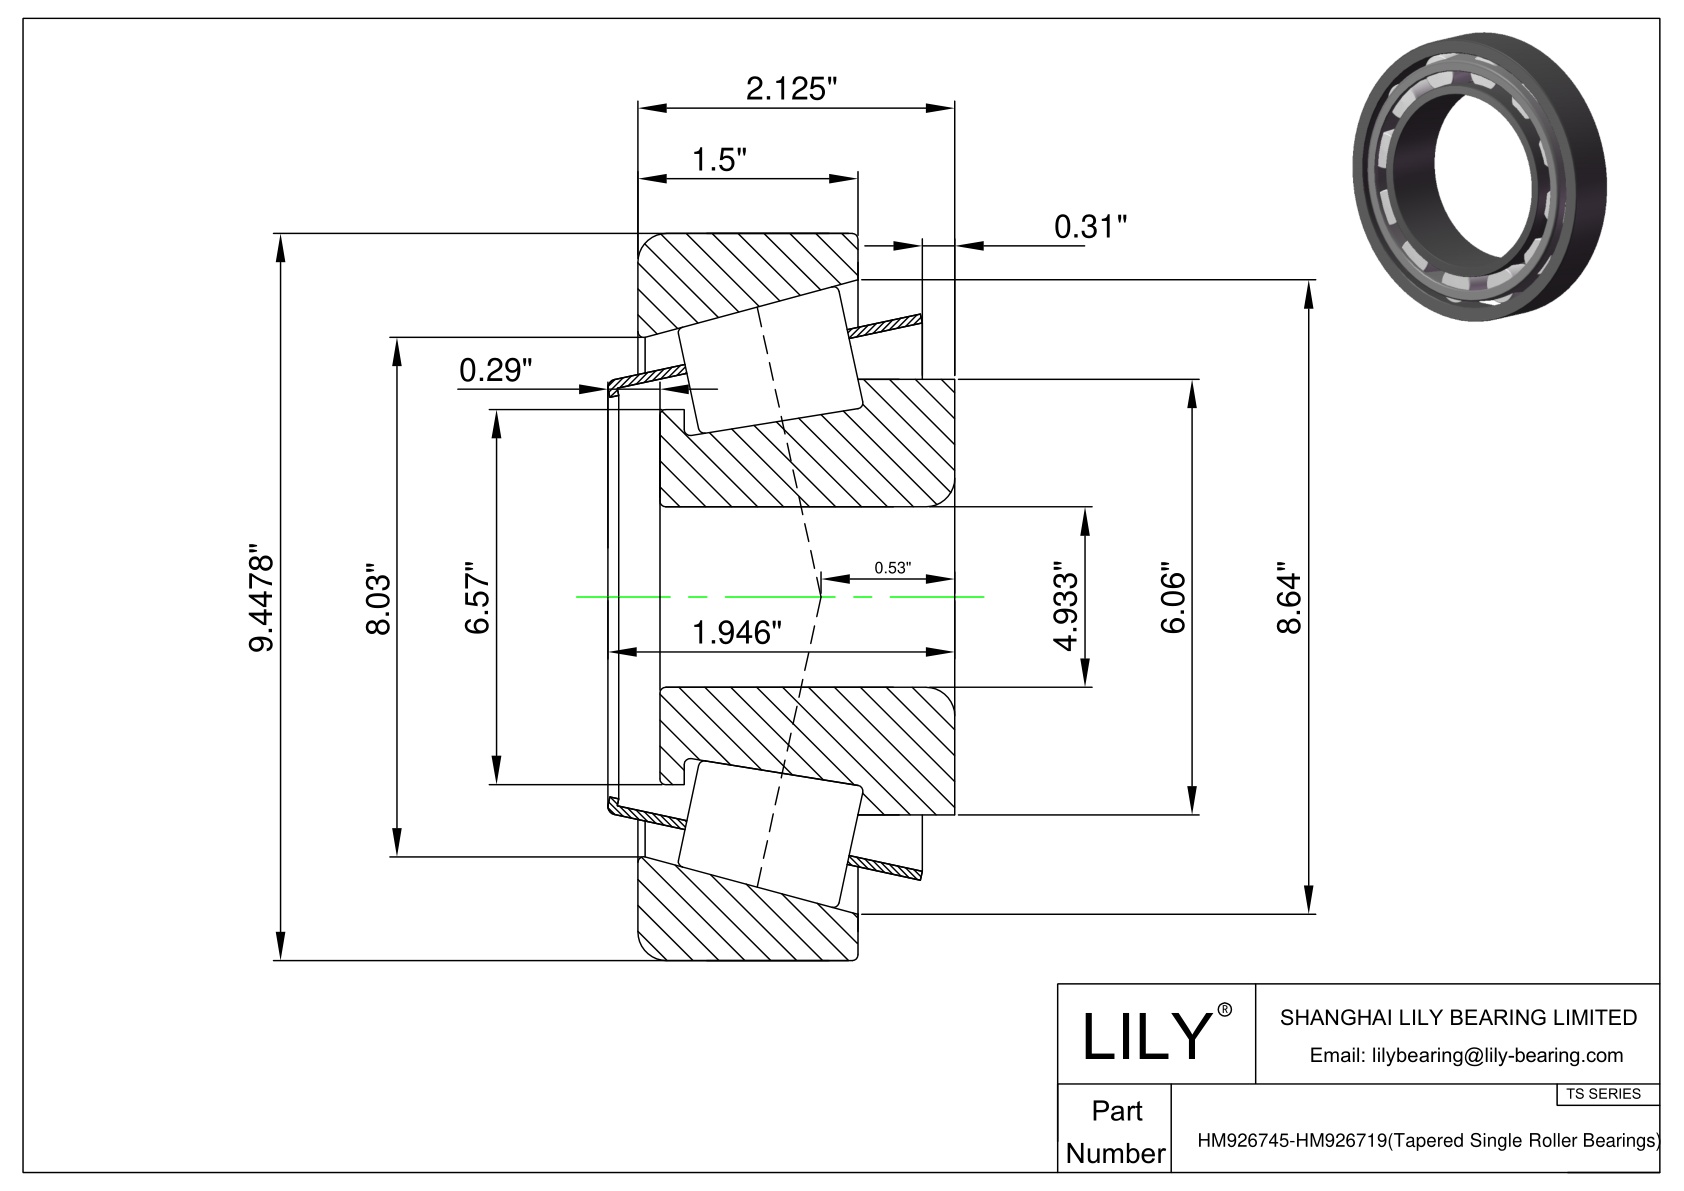 HM926745-HM926719 TS (Tapered Single Roller Bearings) (Imperial) cad drawing